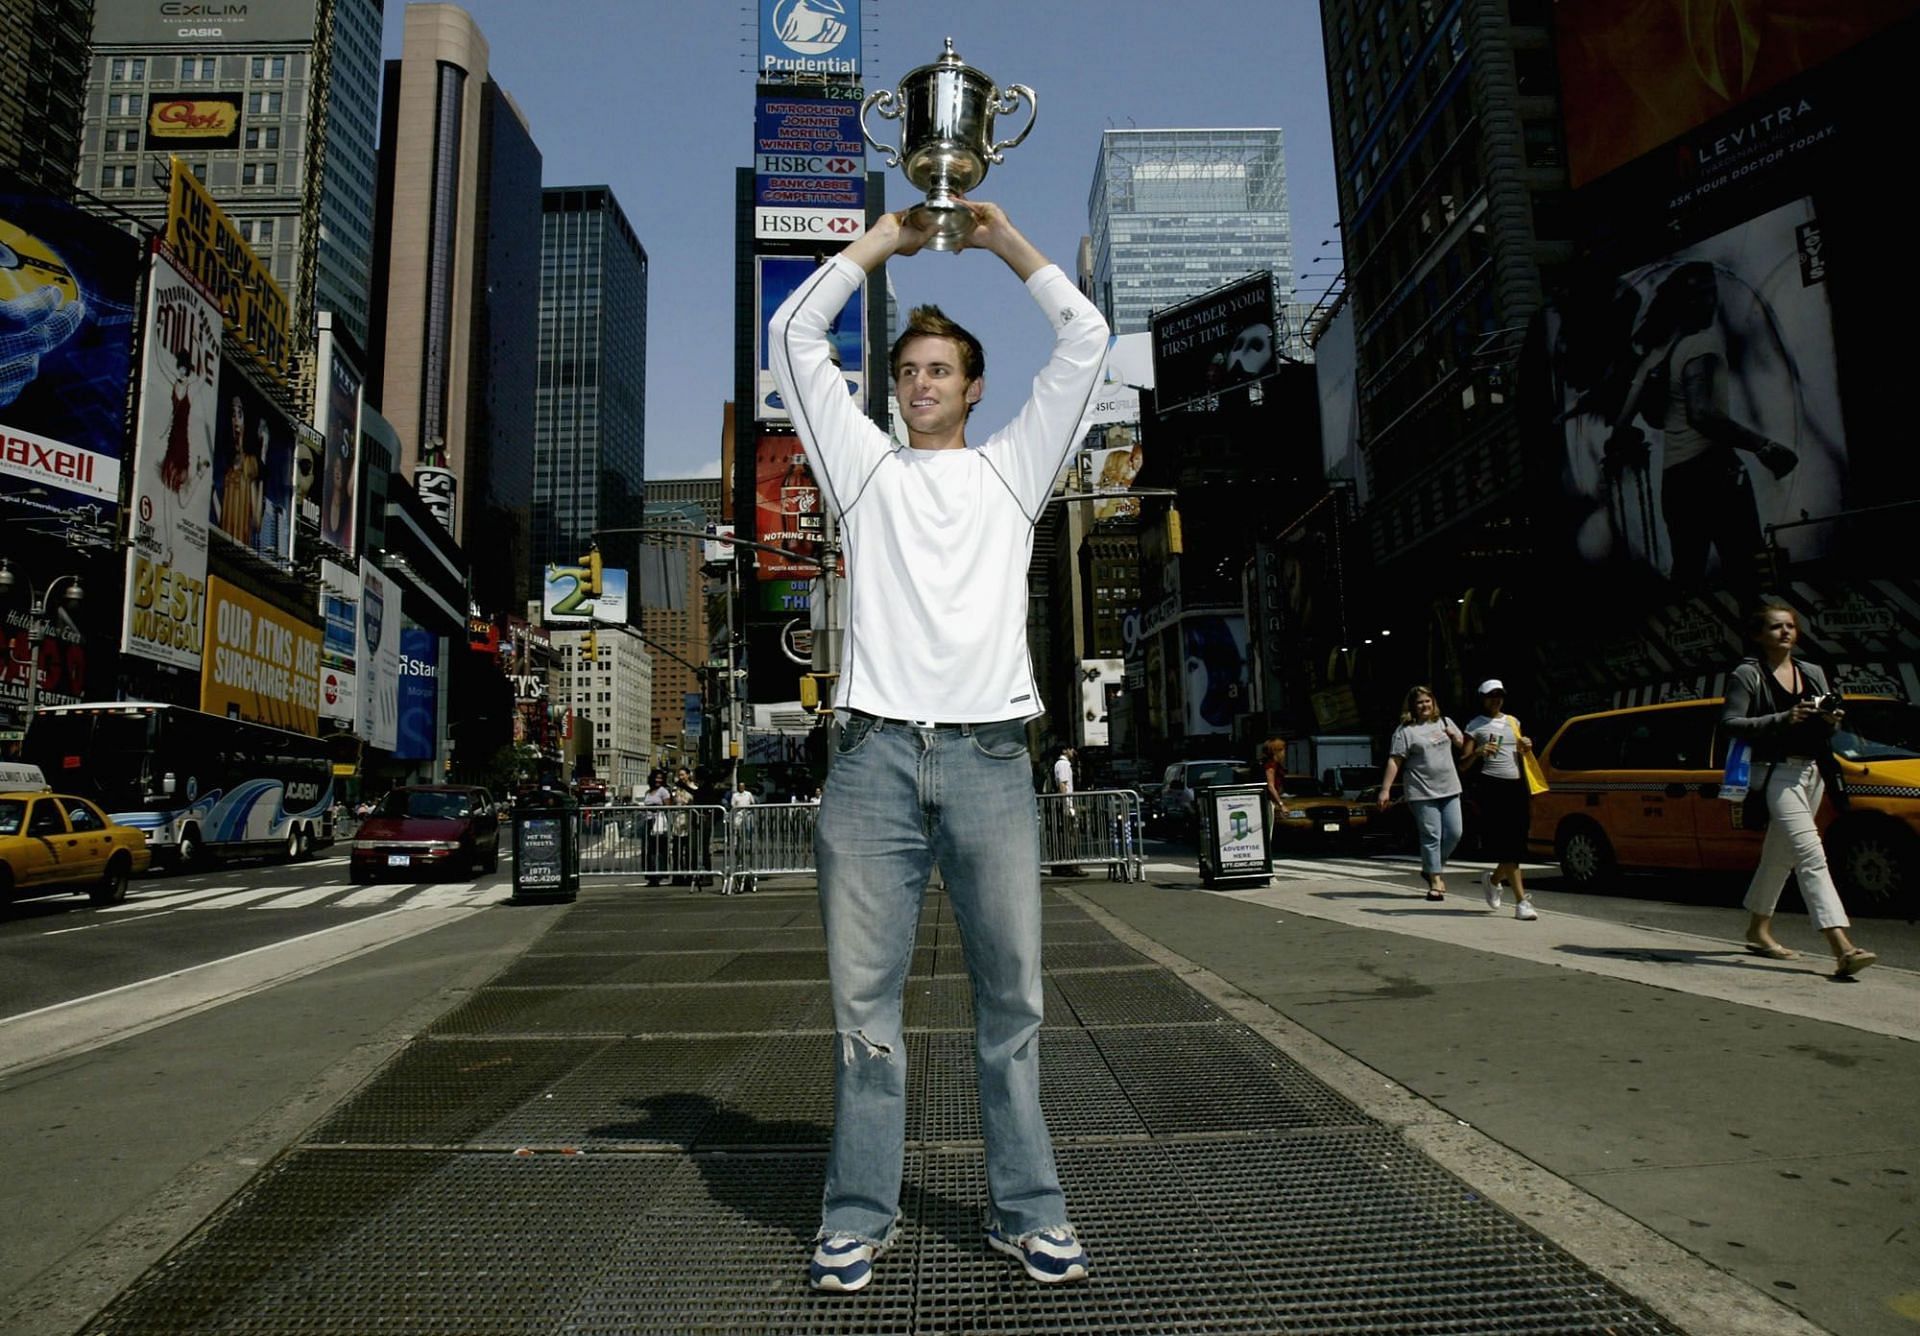 Andy Roddick poses in Times Square after his US Open win.